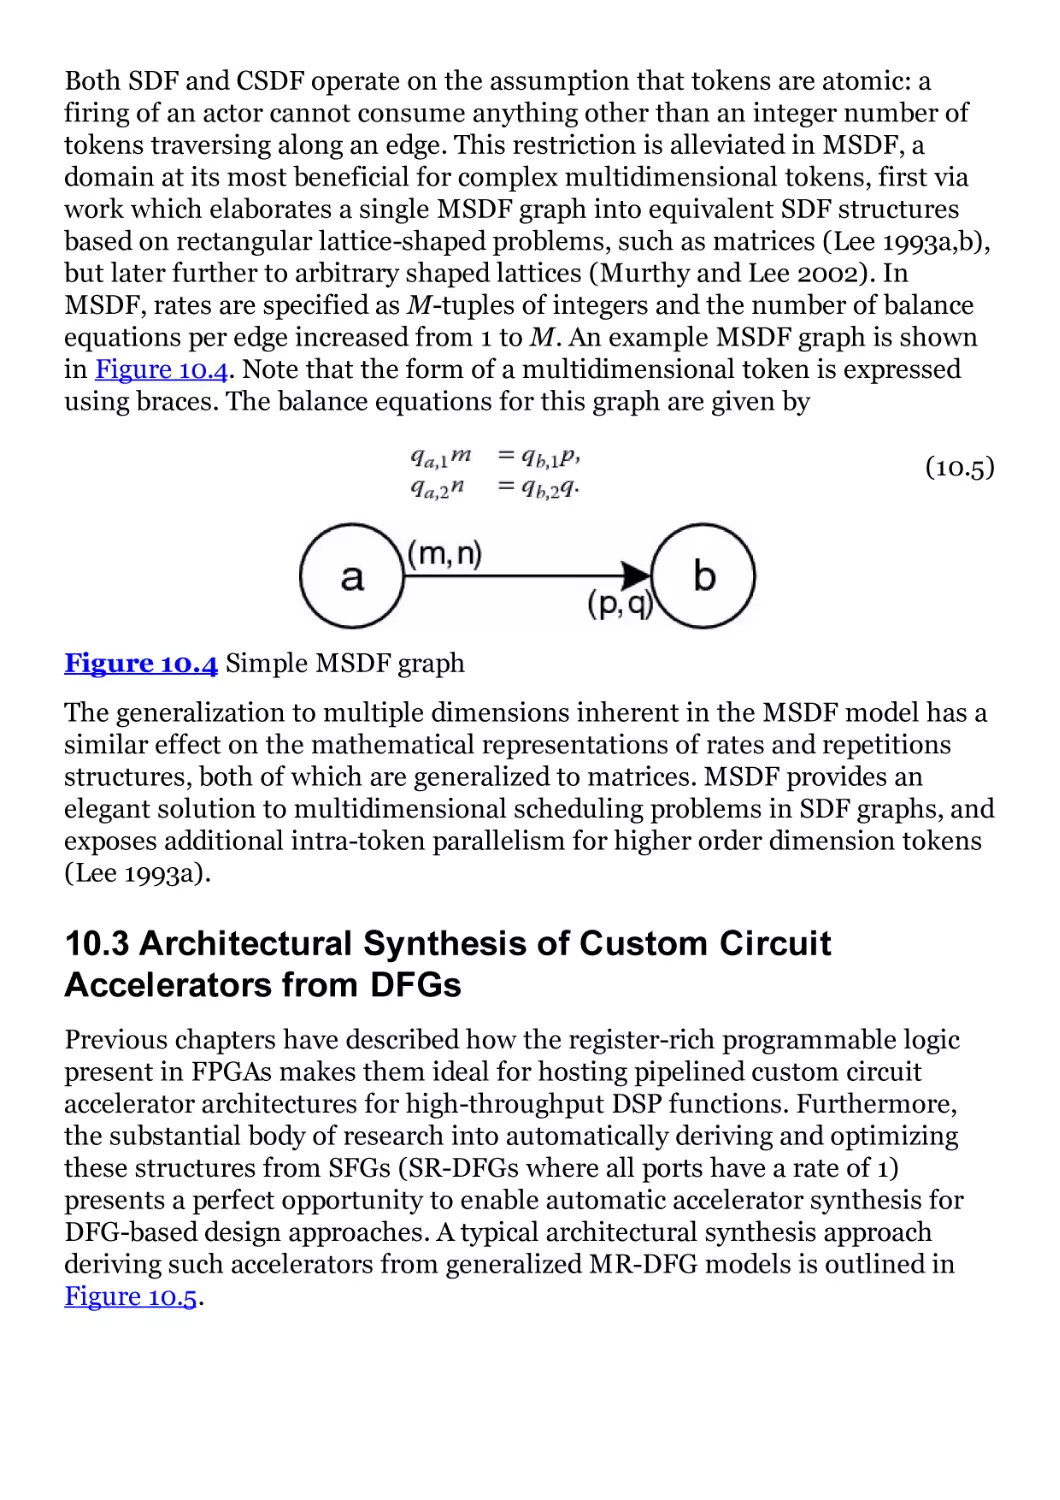 10.3 Architectural Synthesis of Custom Circuit Accelerators from DFGs